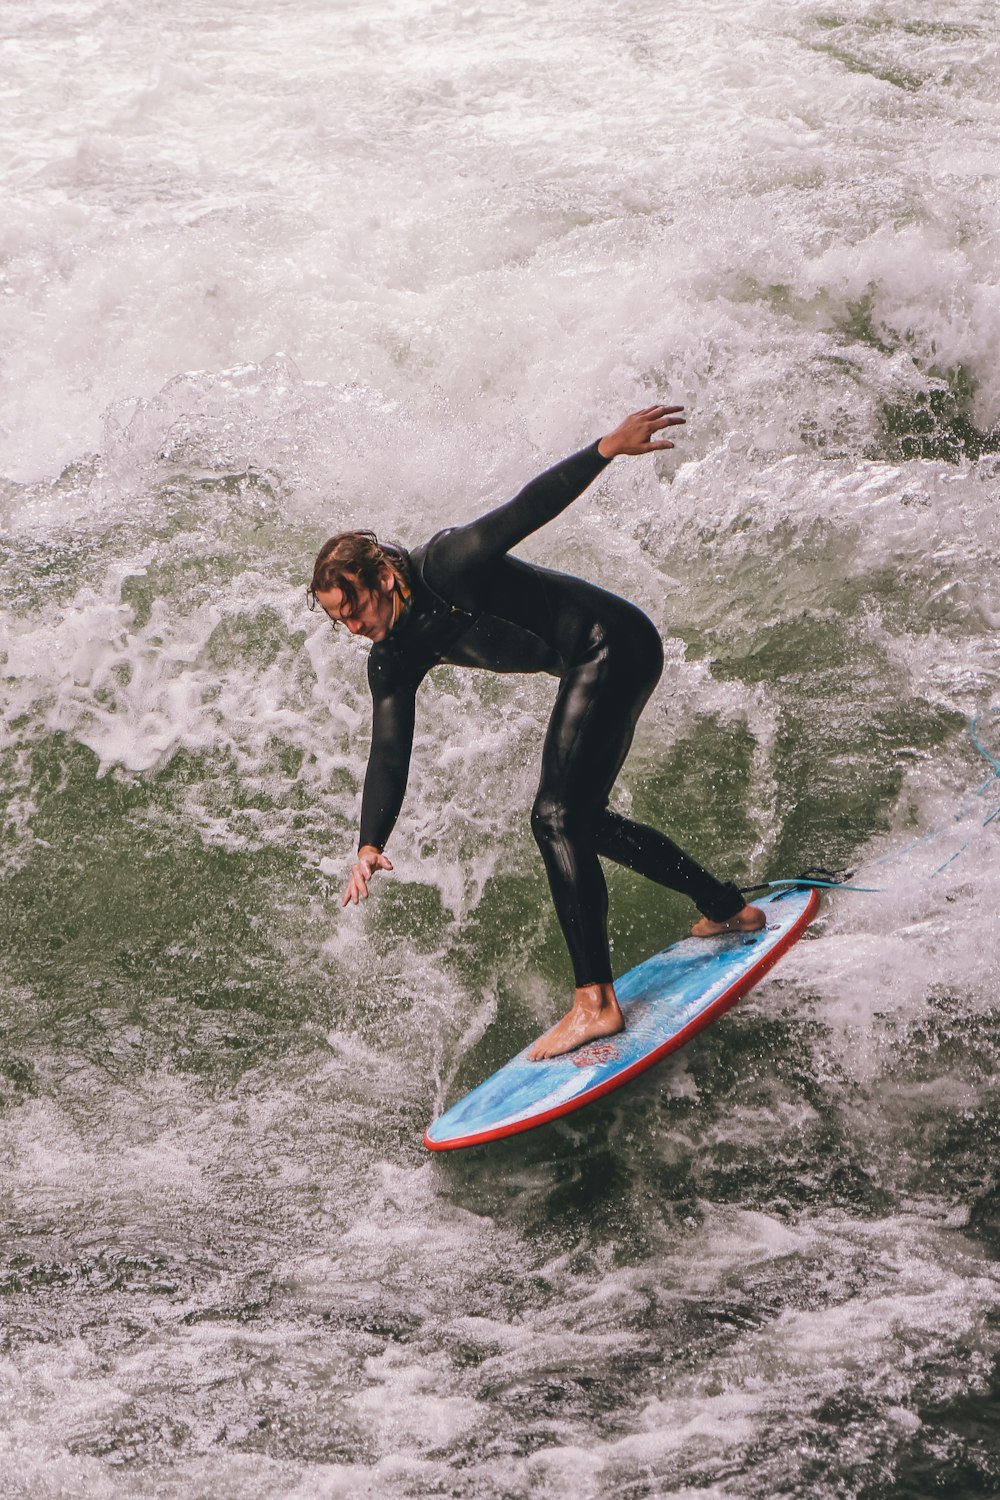 a man riding a surfboard on top of a wave